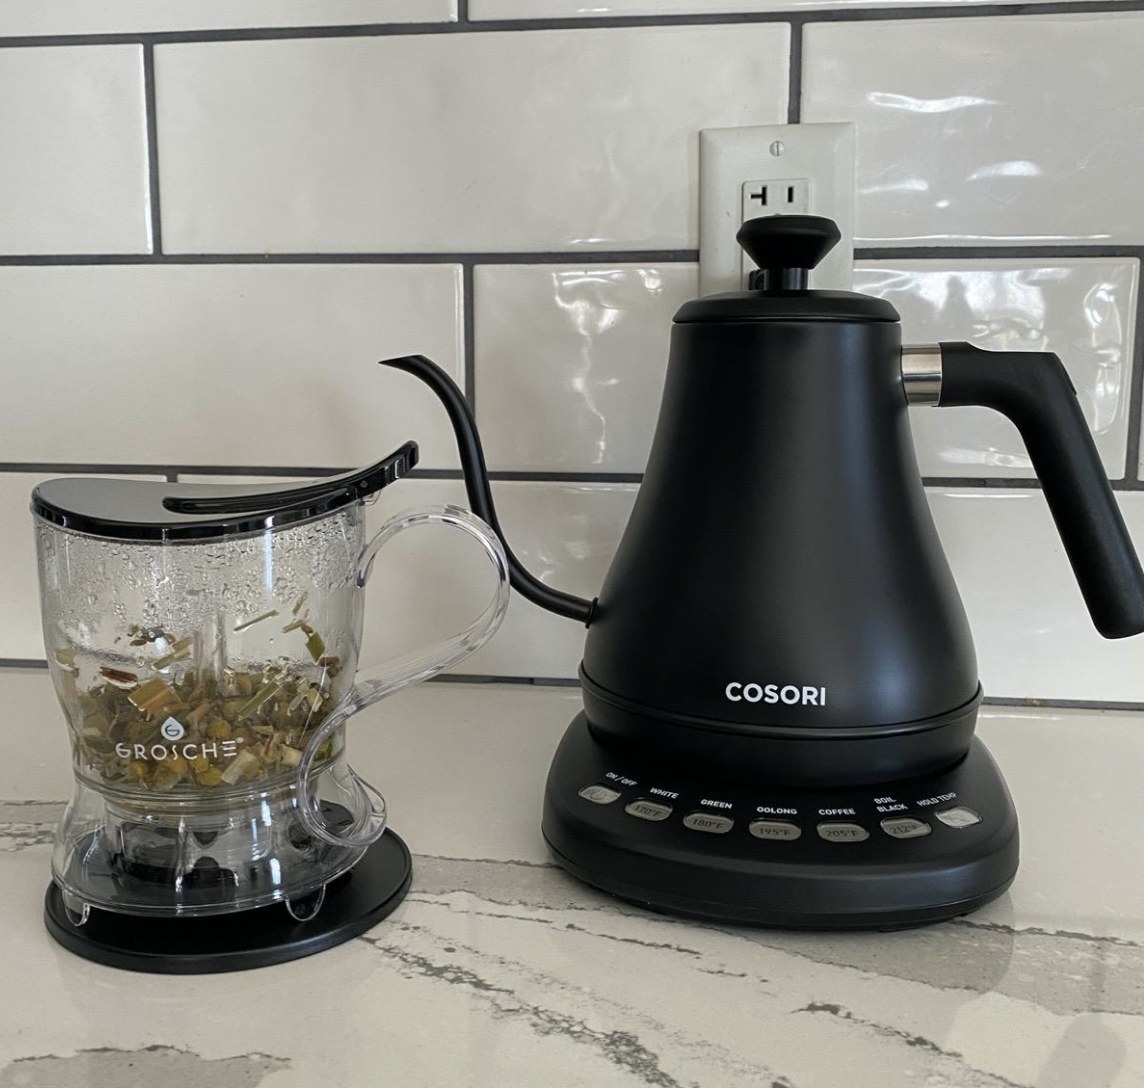 the electric kettle next to a tea cup